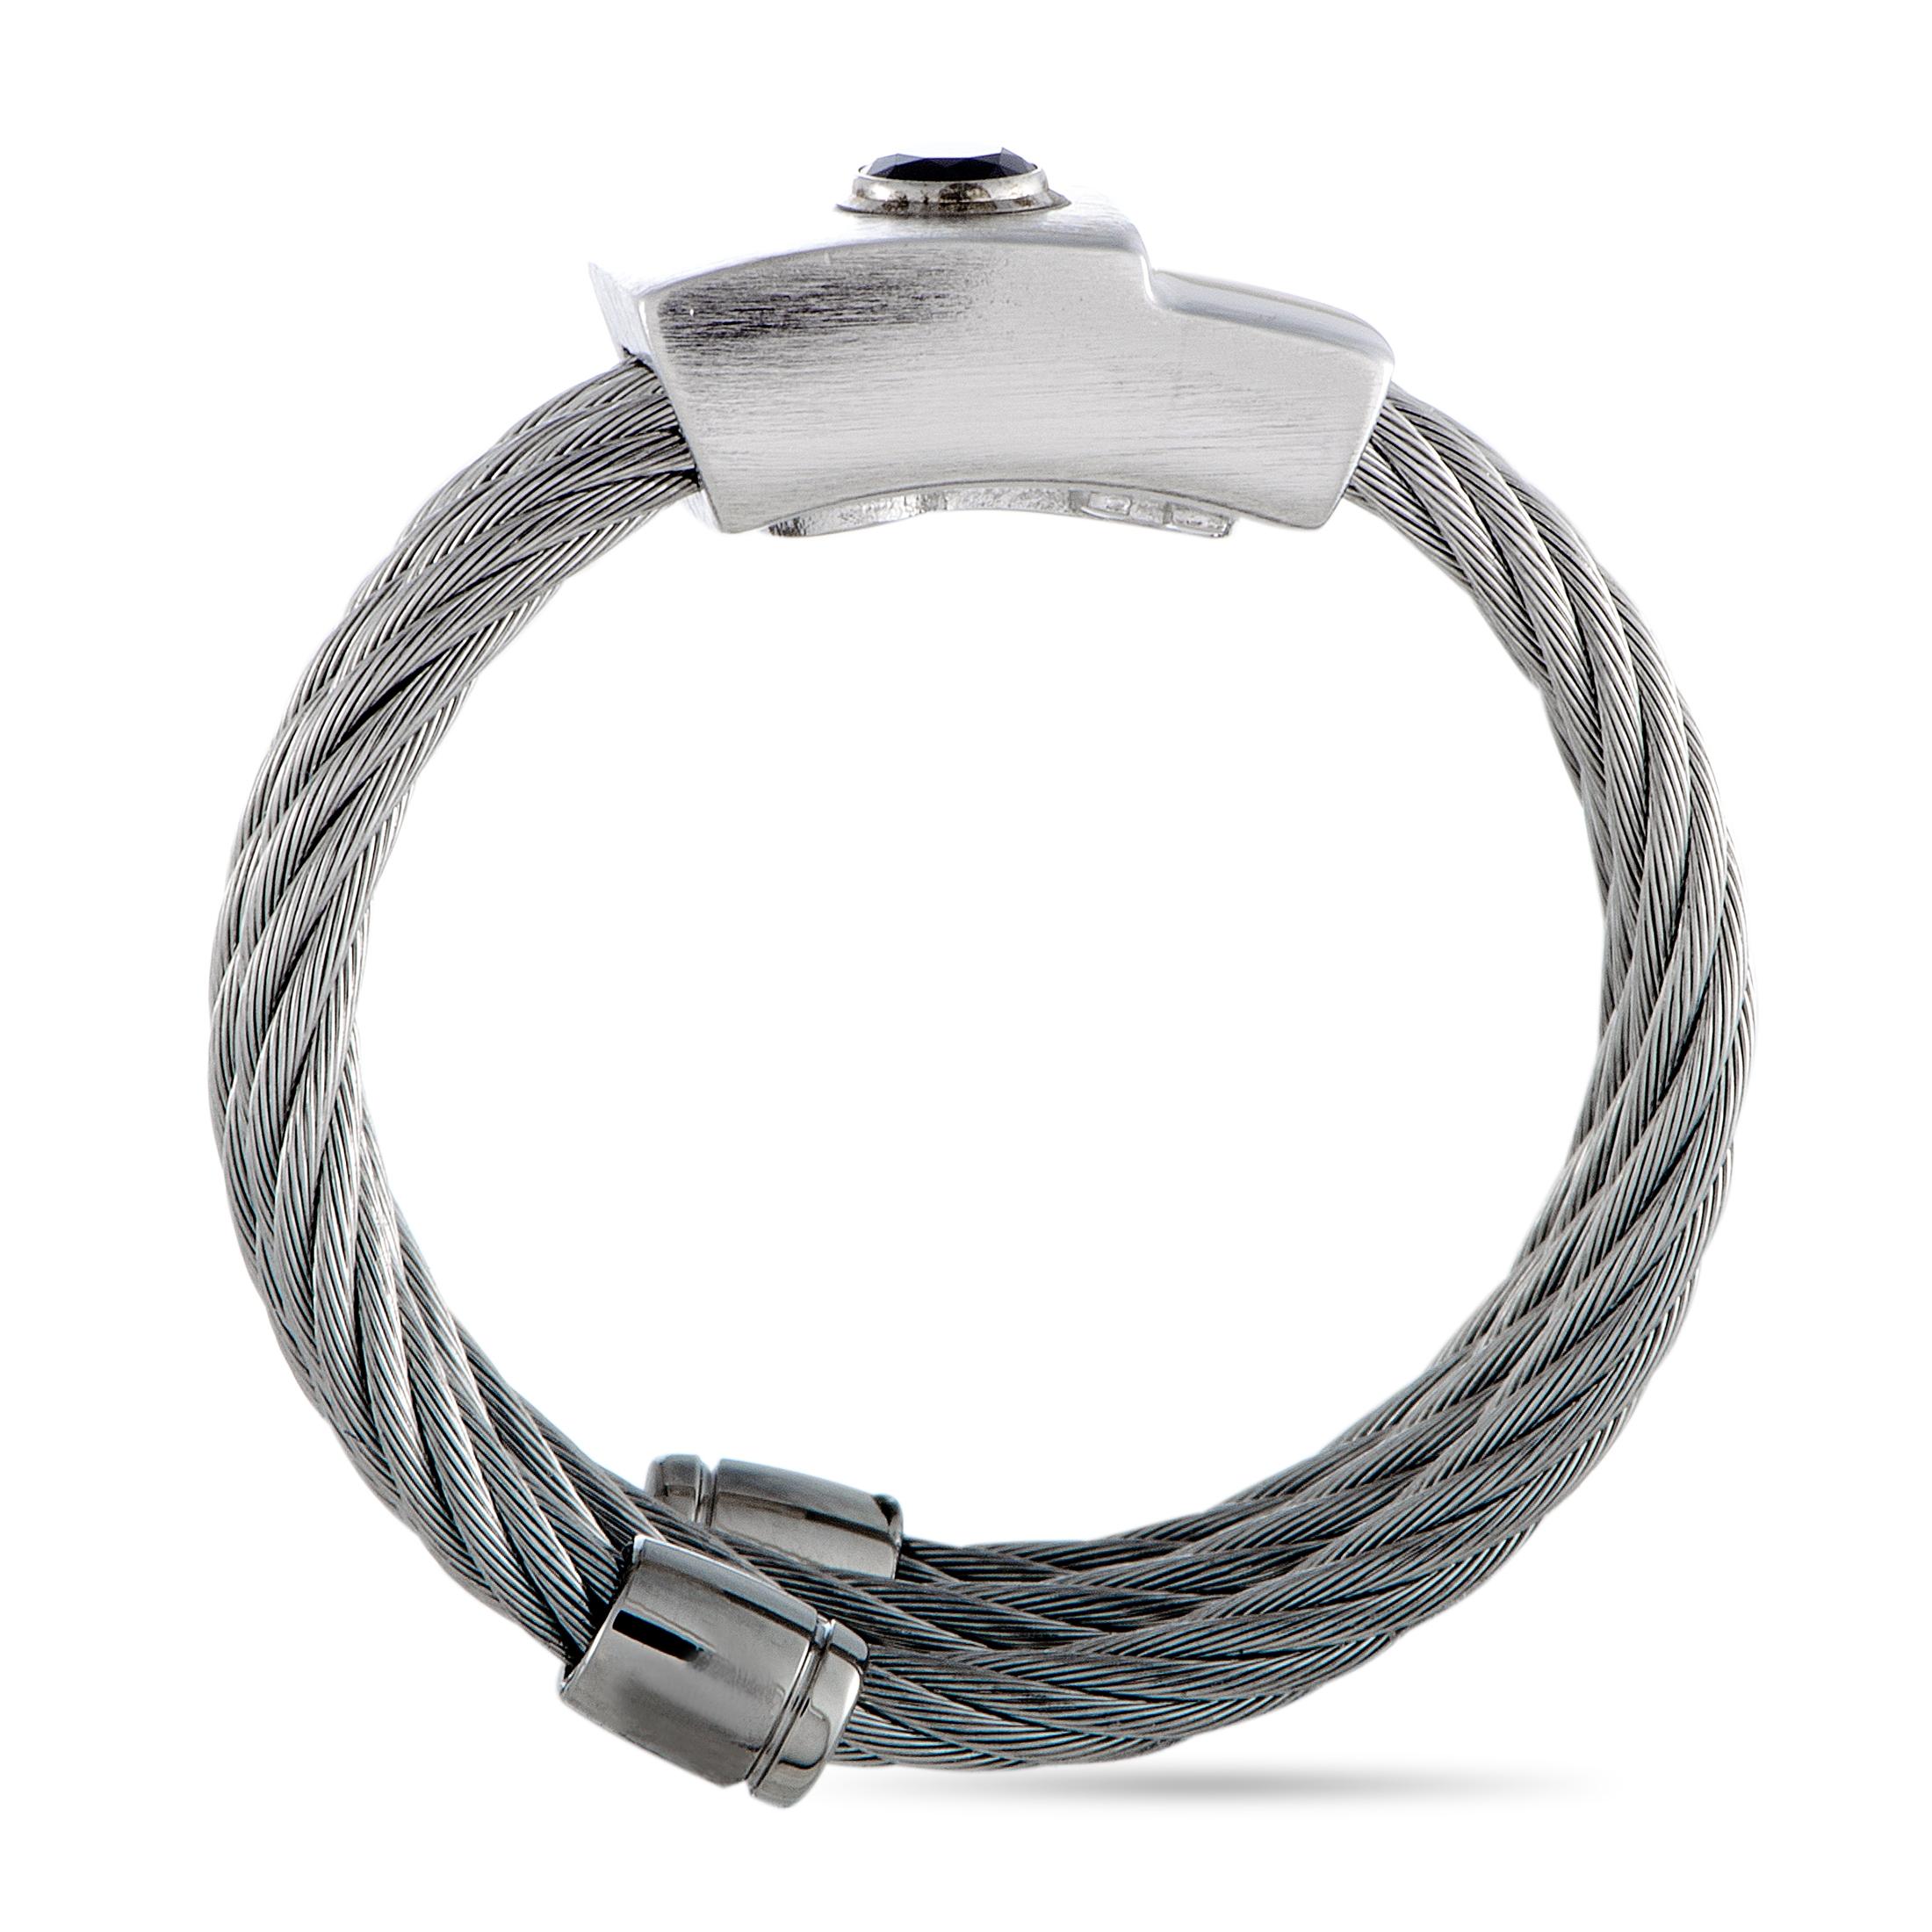 The ingenious cable motif gives an intriguingly offbeat appeal to this extraordinarily designed ring that is created by Charriol. The ring is expertly crafted from stainless steel and it weighs 5.8 grams.
 Ring Top Dimensions: 7mm x 12mm